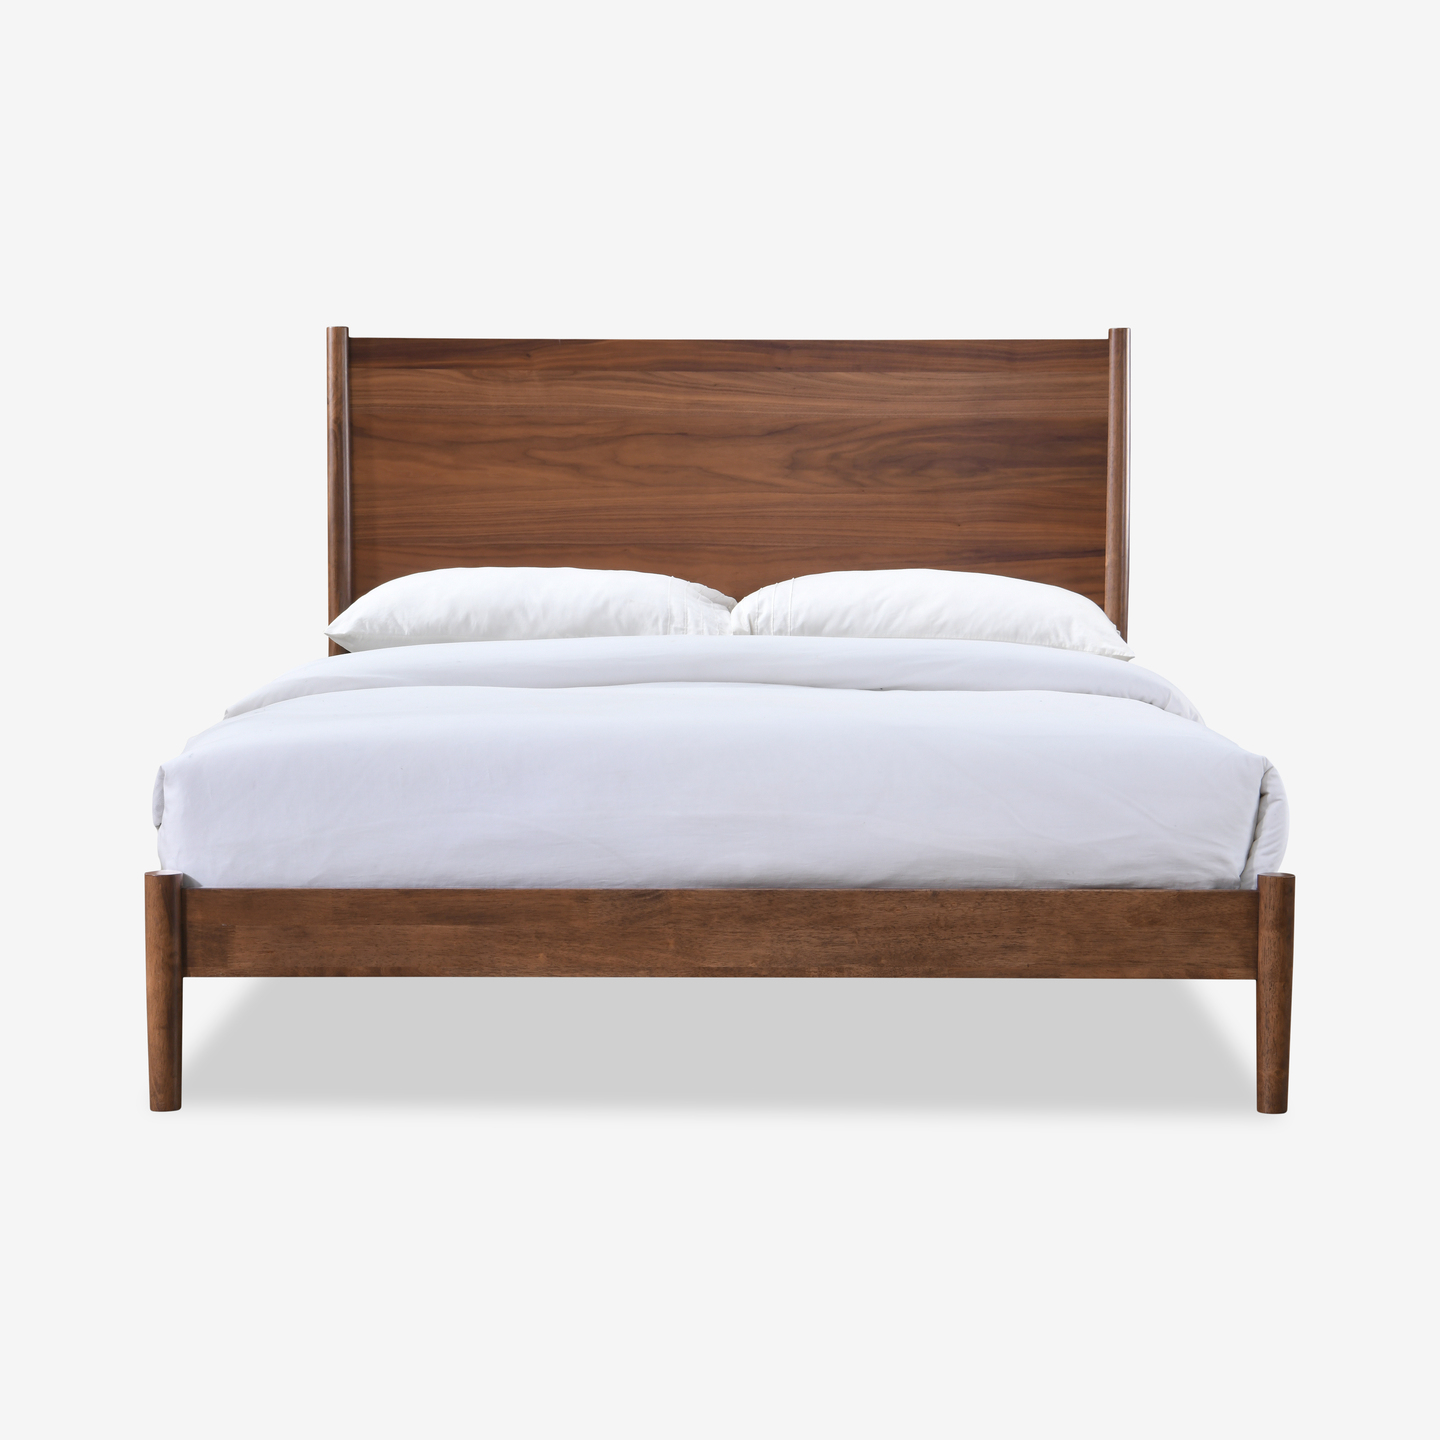 1479_Avalon-Bed-Walnut-Queen_Front_2021